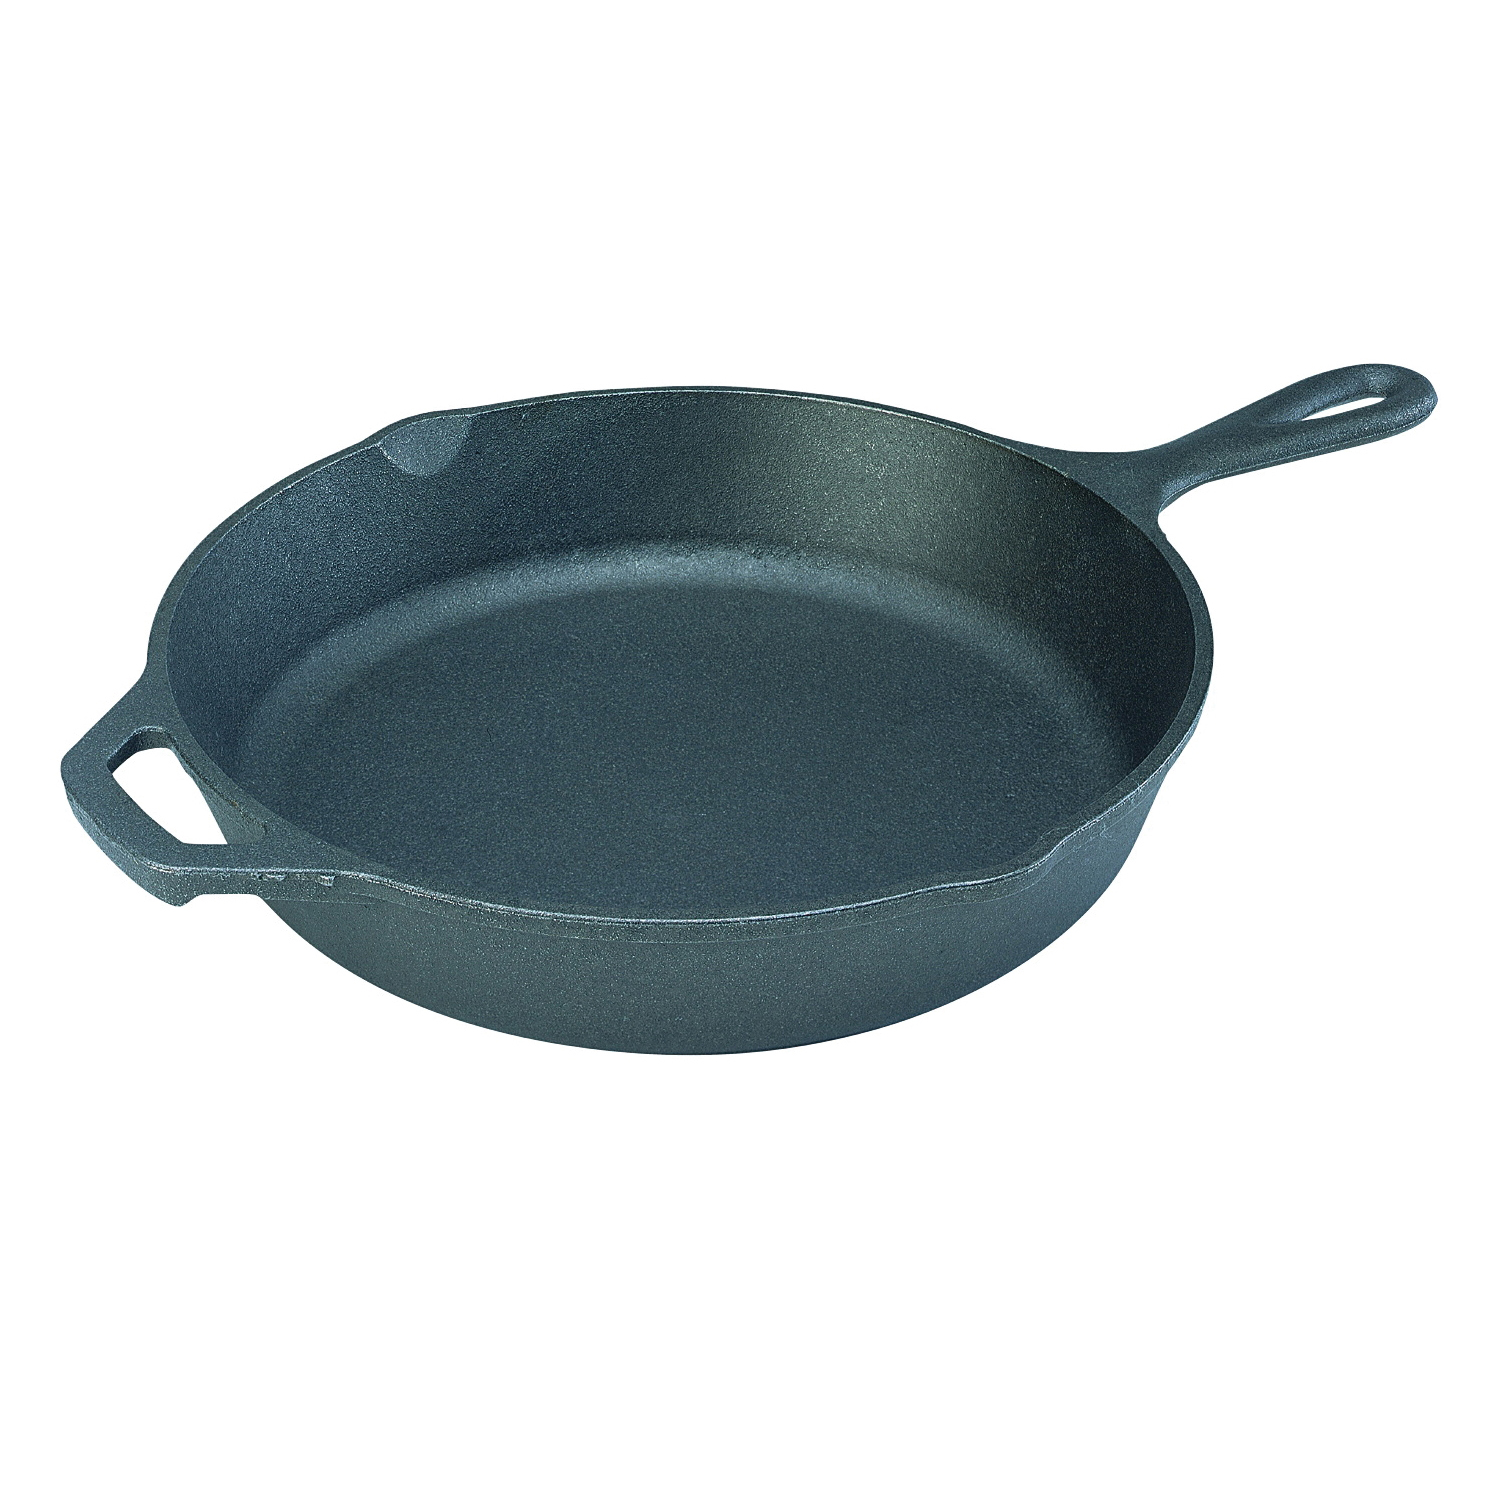 Lodge L10GPL 12 Pre-Seasoned Cast Iron Grill Pan with Dual Handles